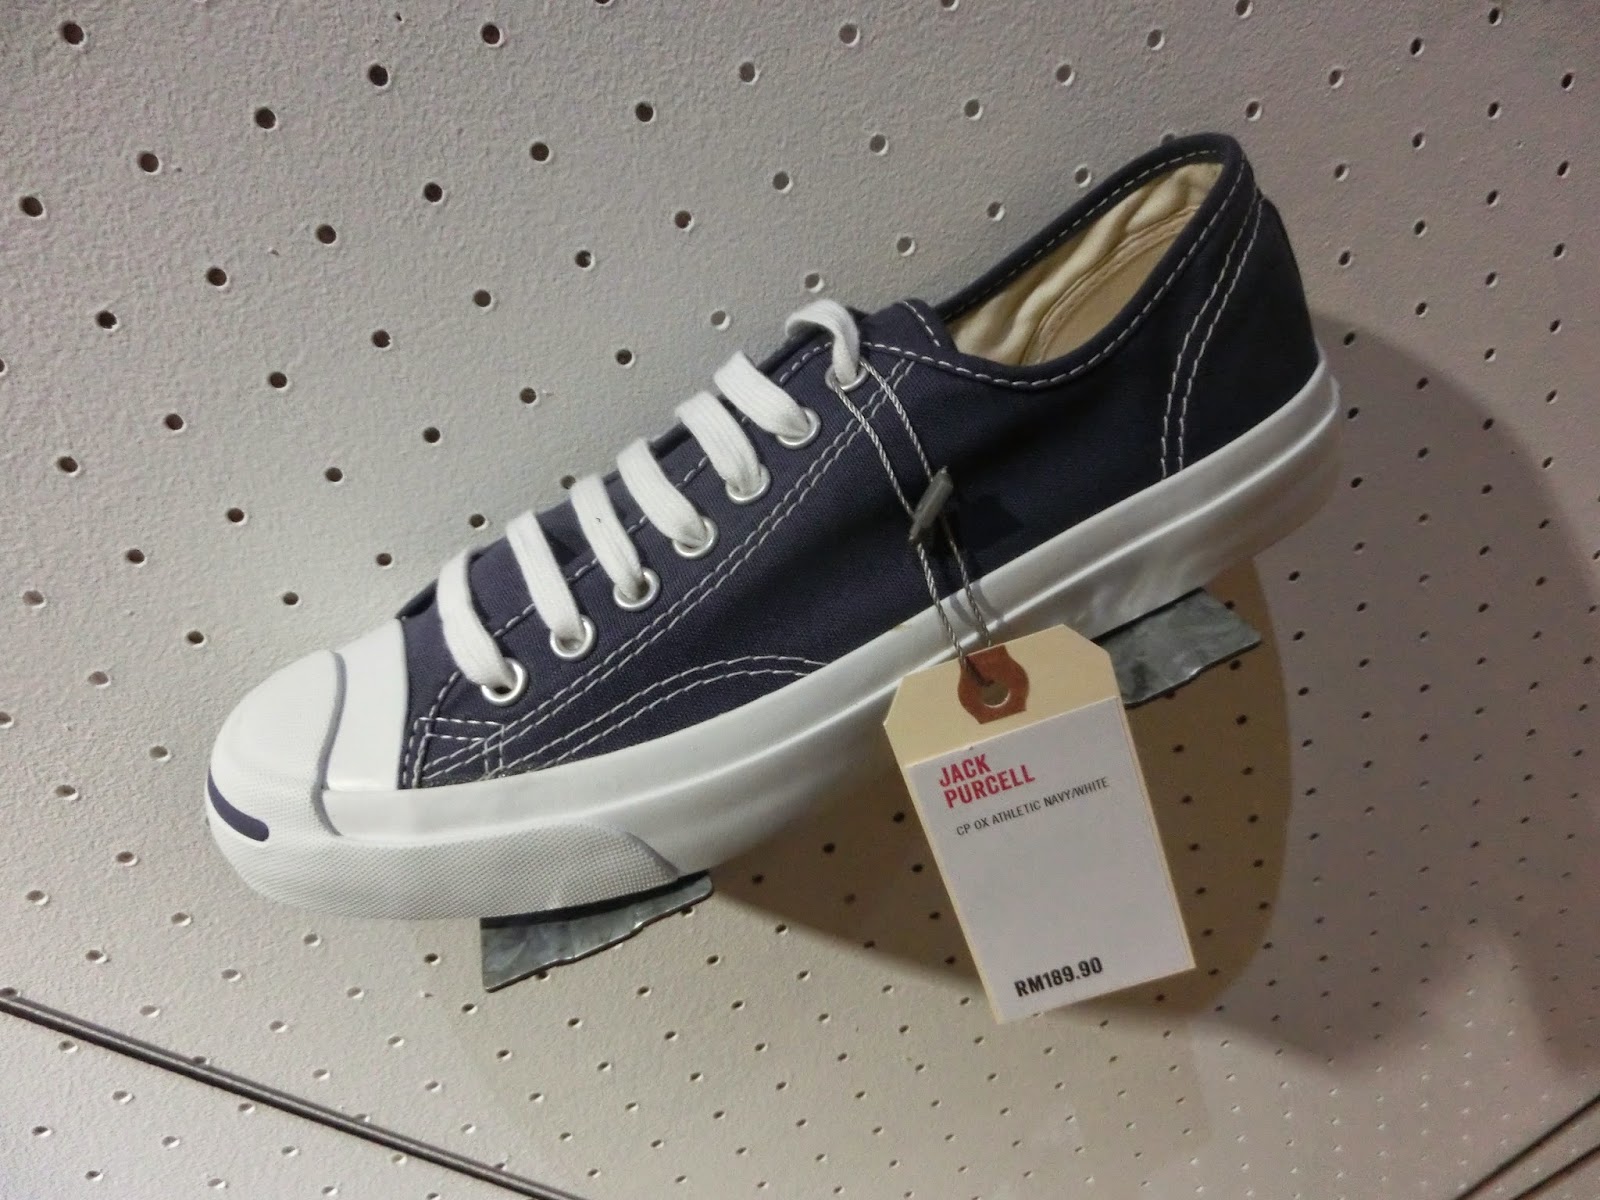 Converse Jack Purcell Malaysia / Buy 2 From Any Case Converse Jack